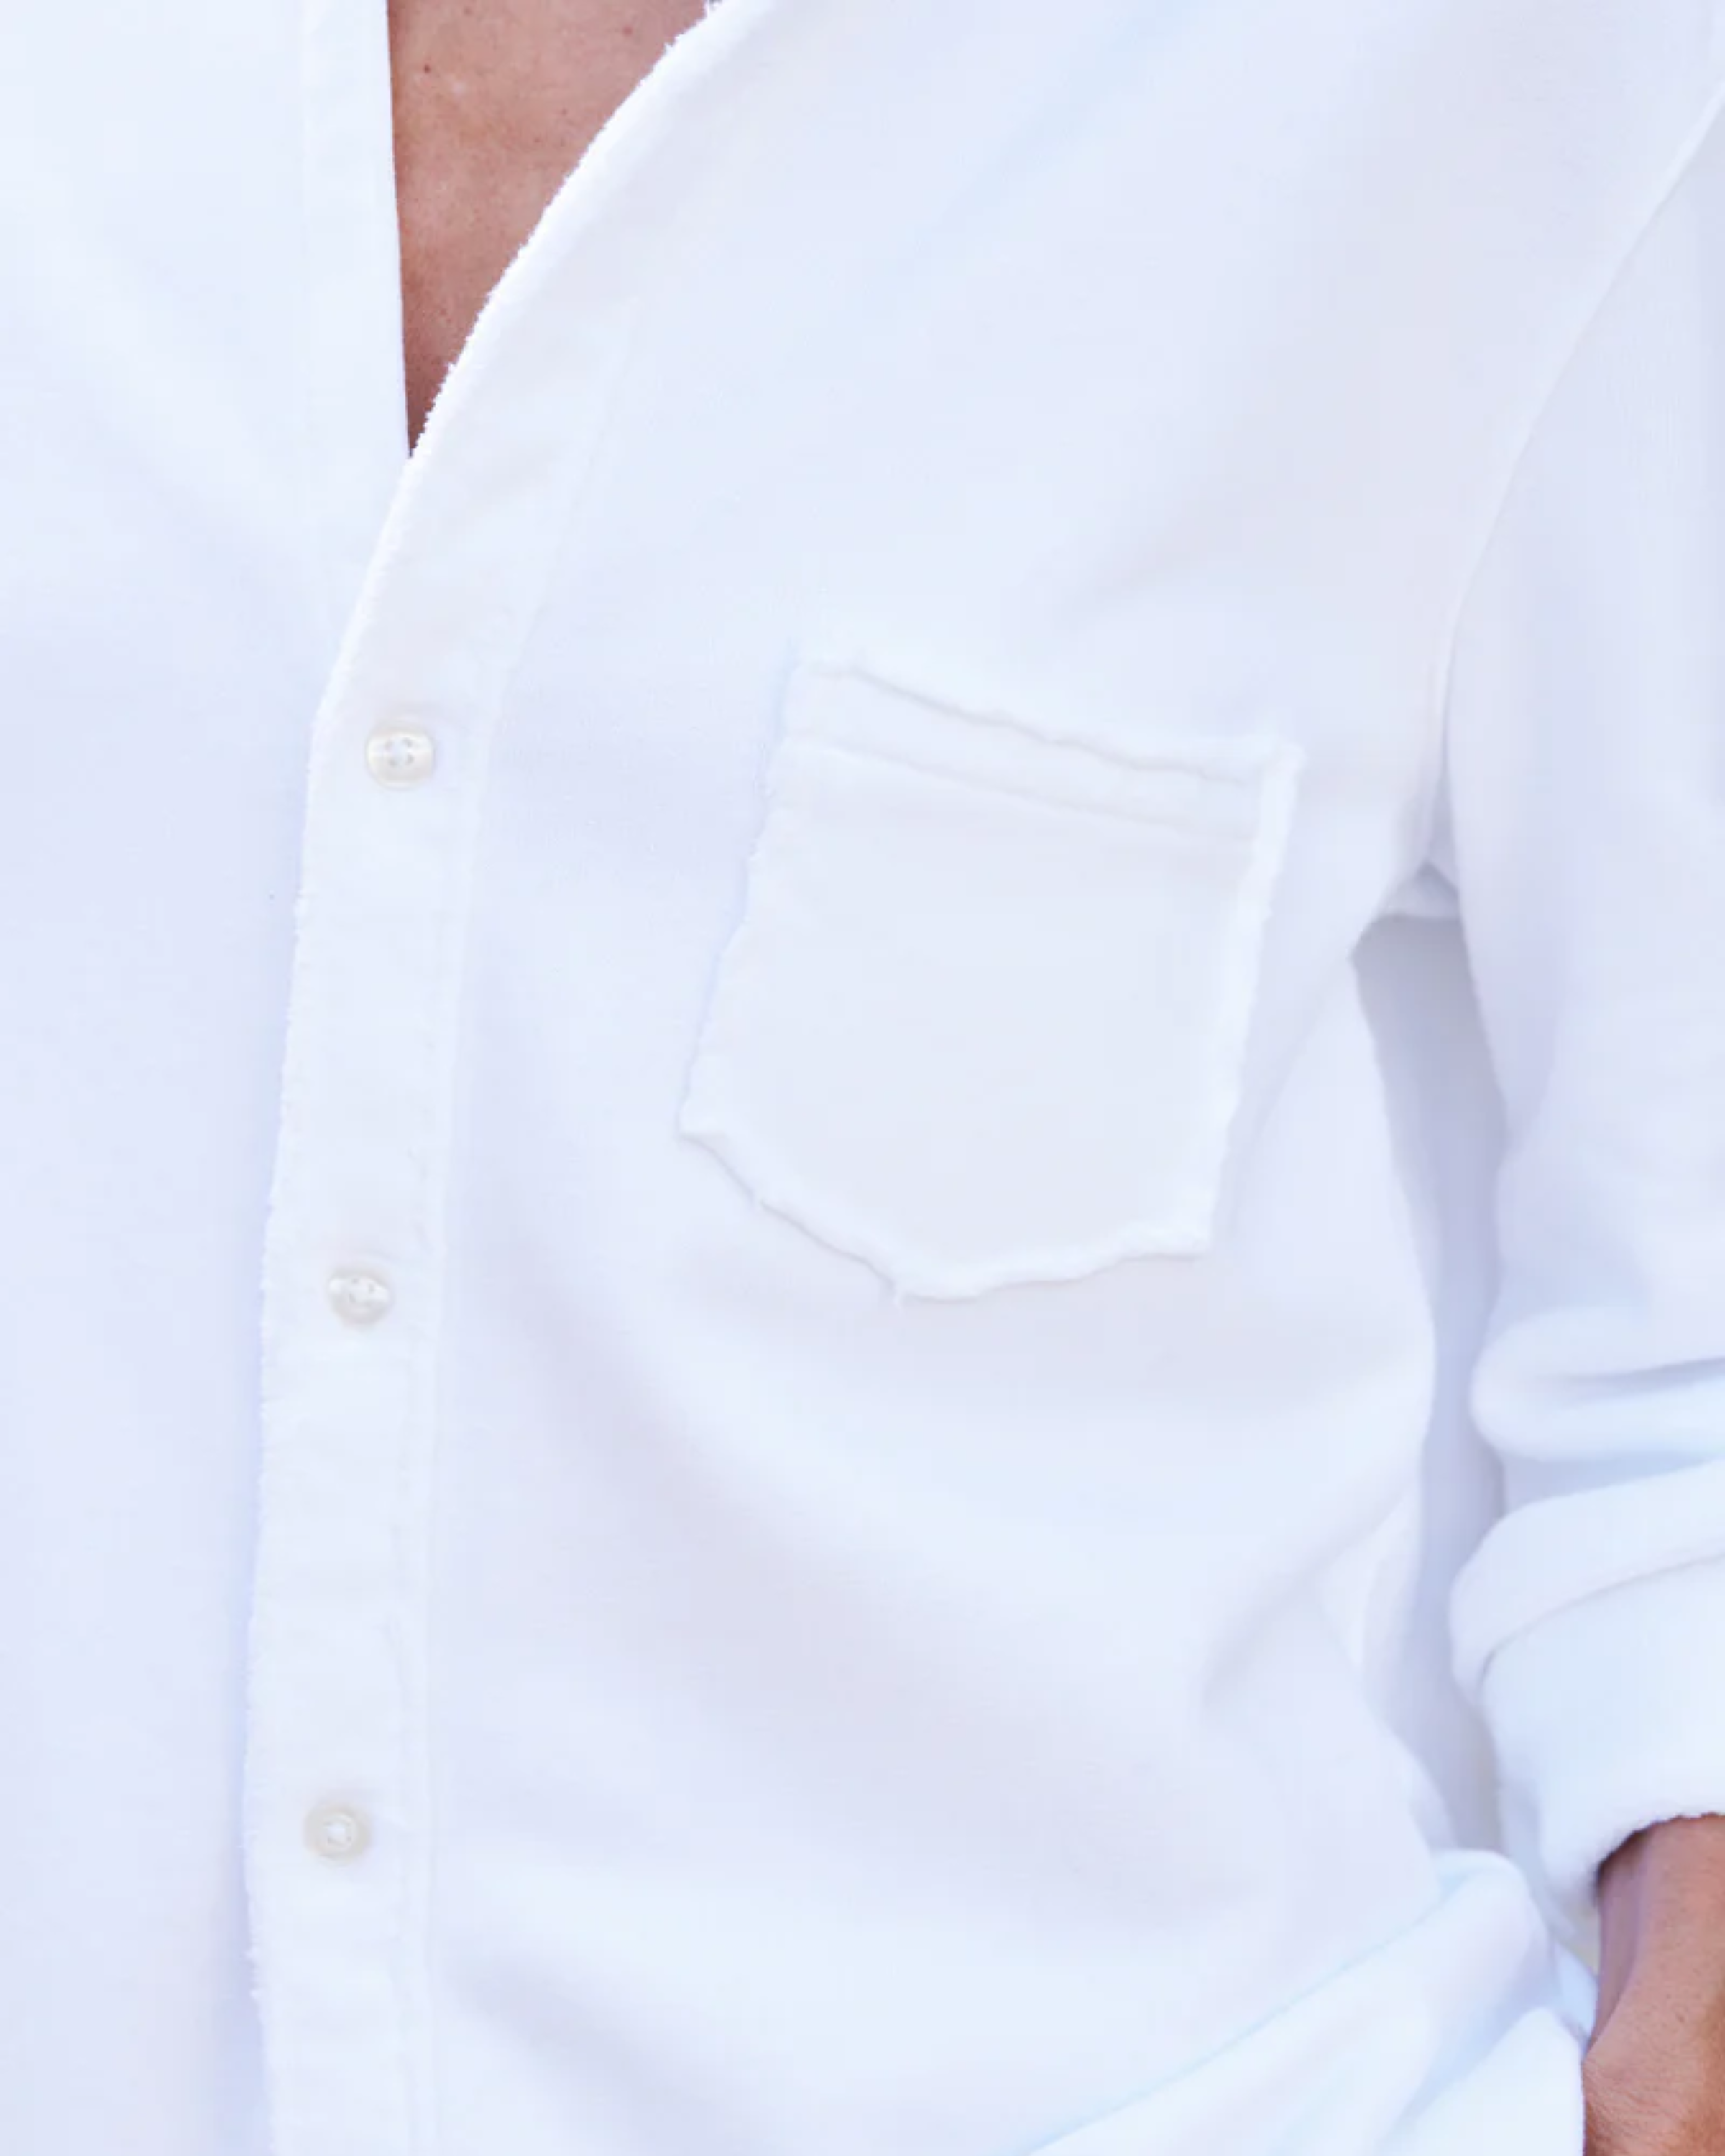 Frank & Eileen Relaxed Button Up Shirt in White